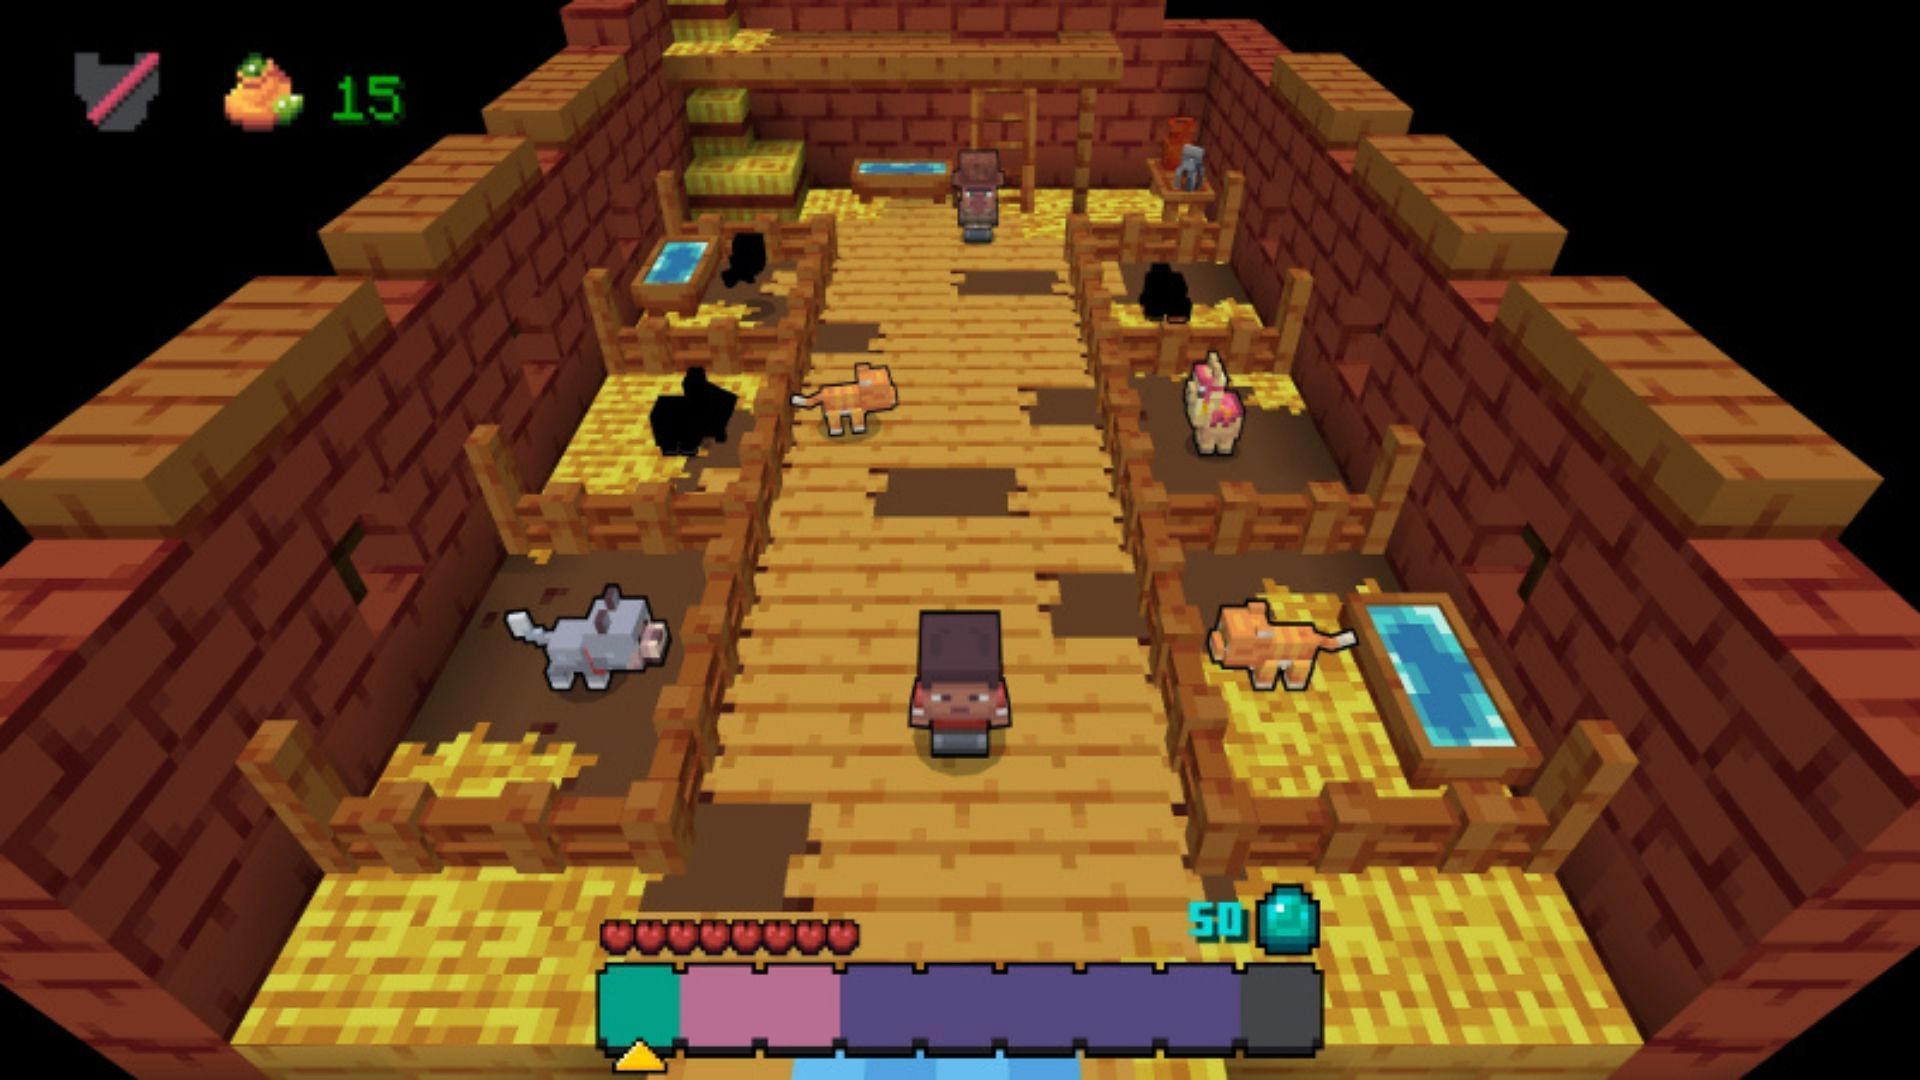 Now you can take part in a 2.5D dungeon crawler roguelike in Minecraft